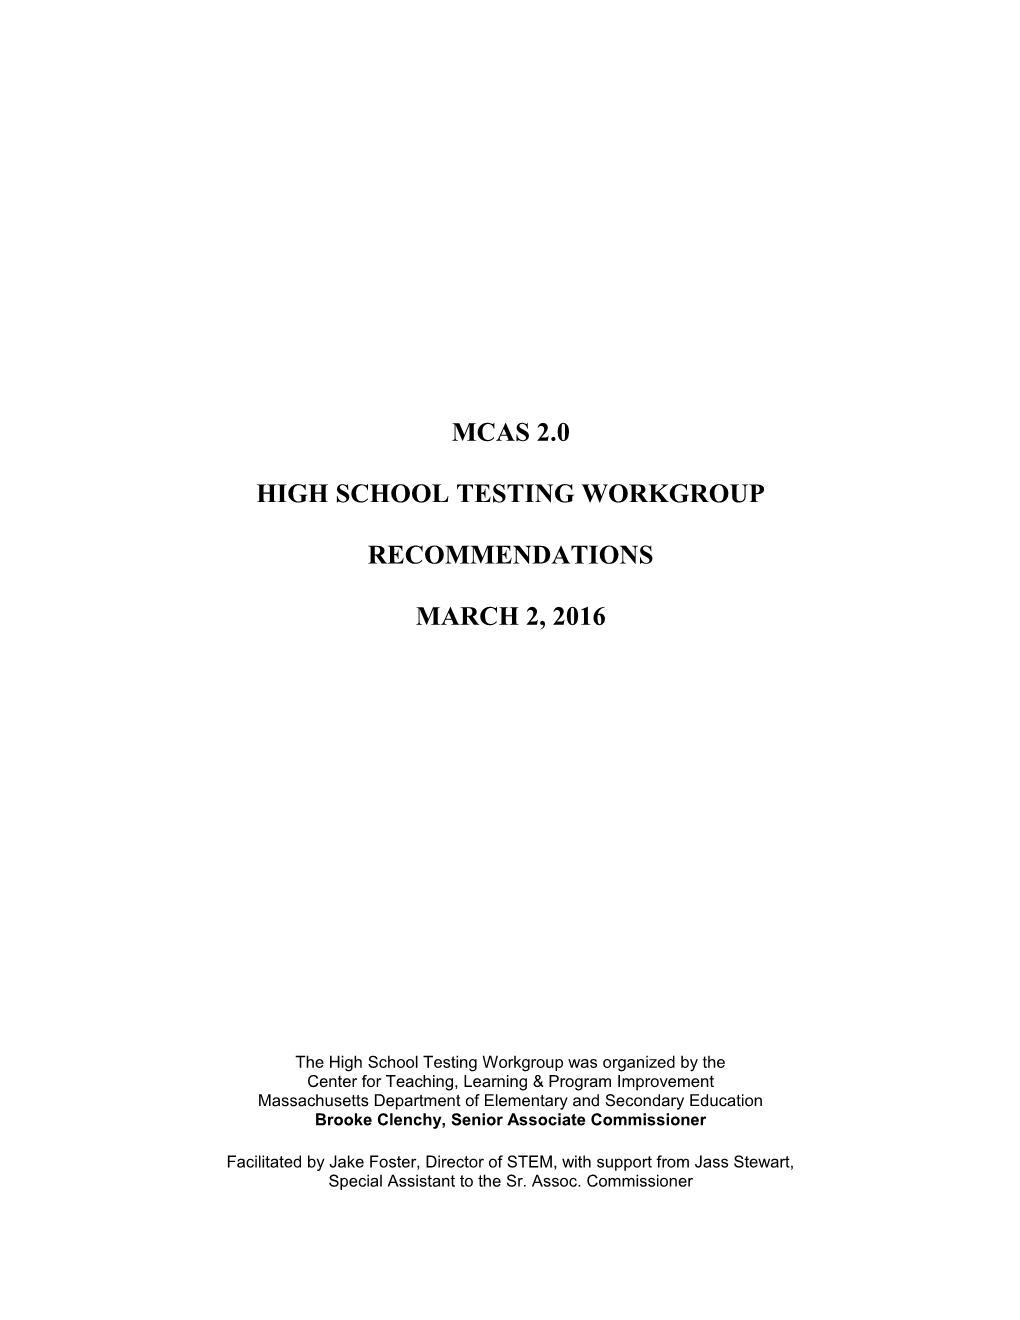 MCAS 2.0 High School Testing Workgroup Recommendations